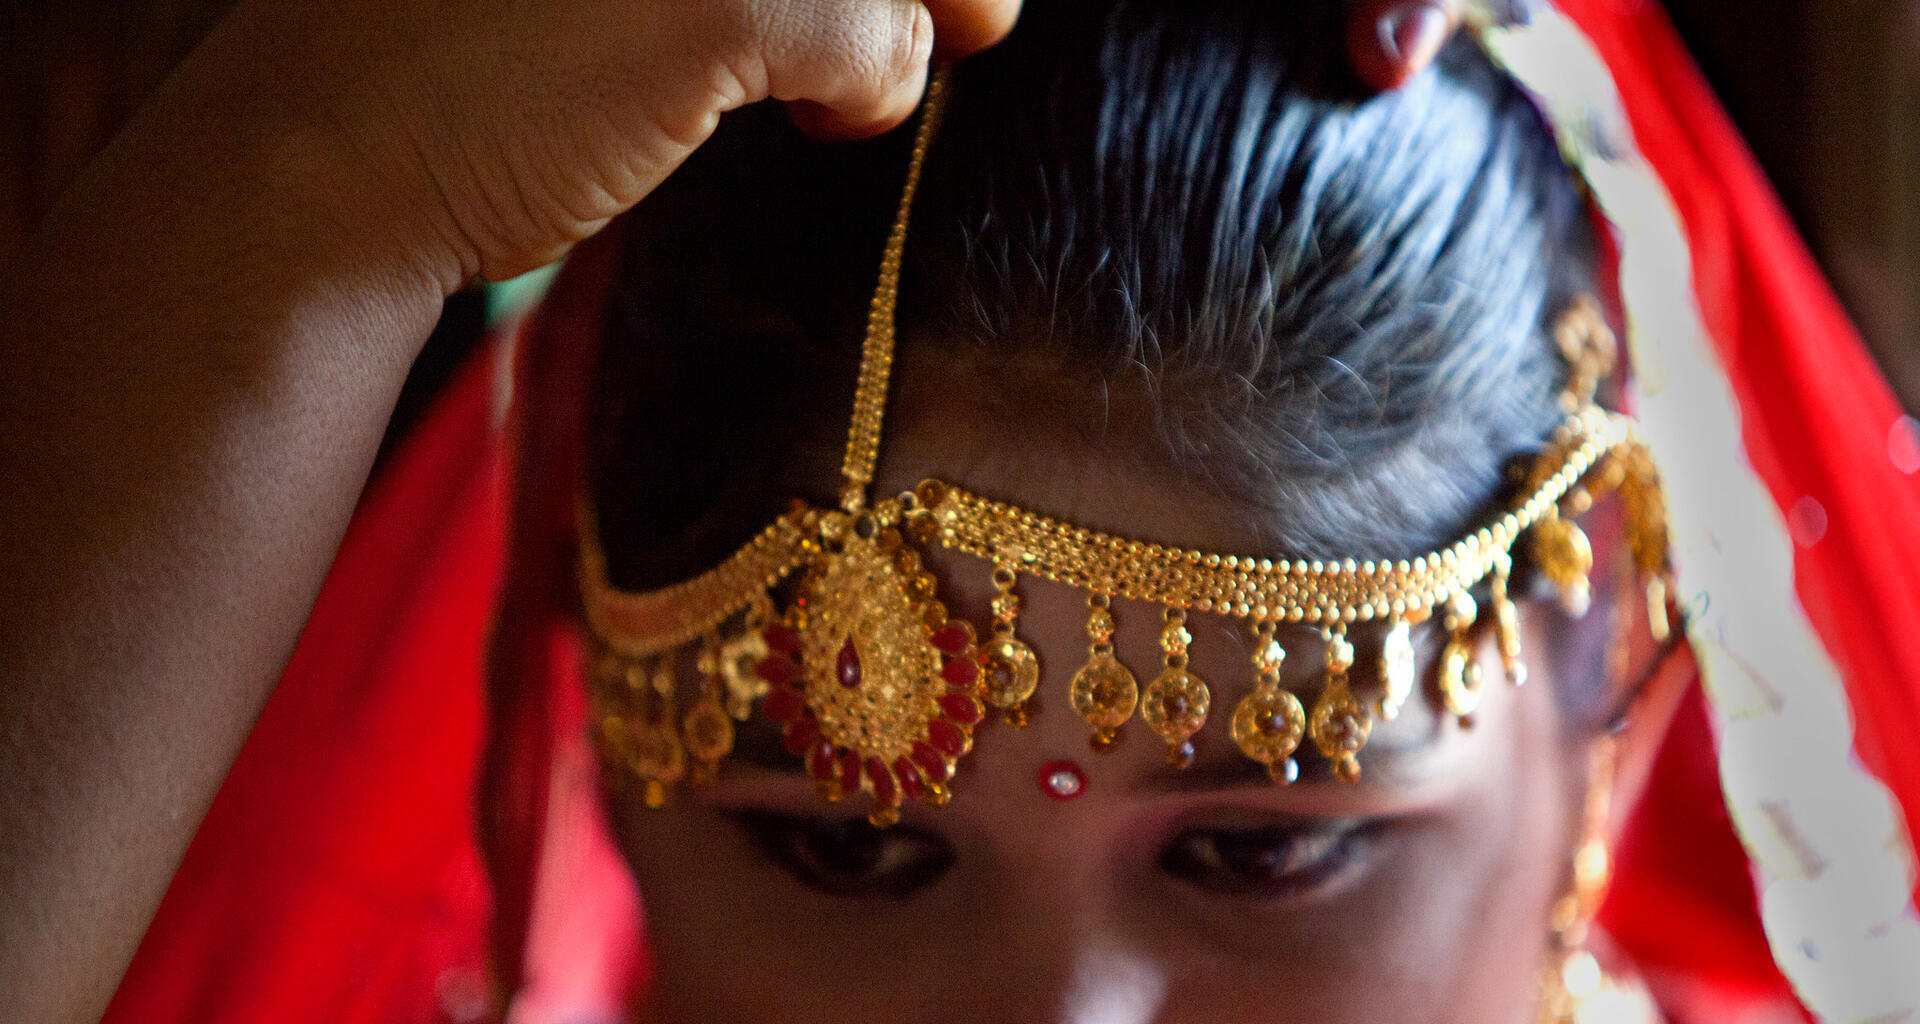 A young girl being dressed in decorative jewelry.